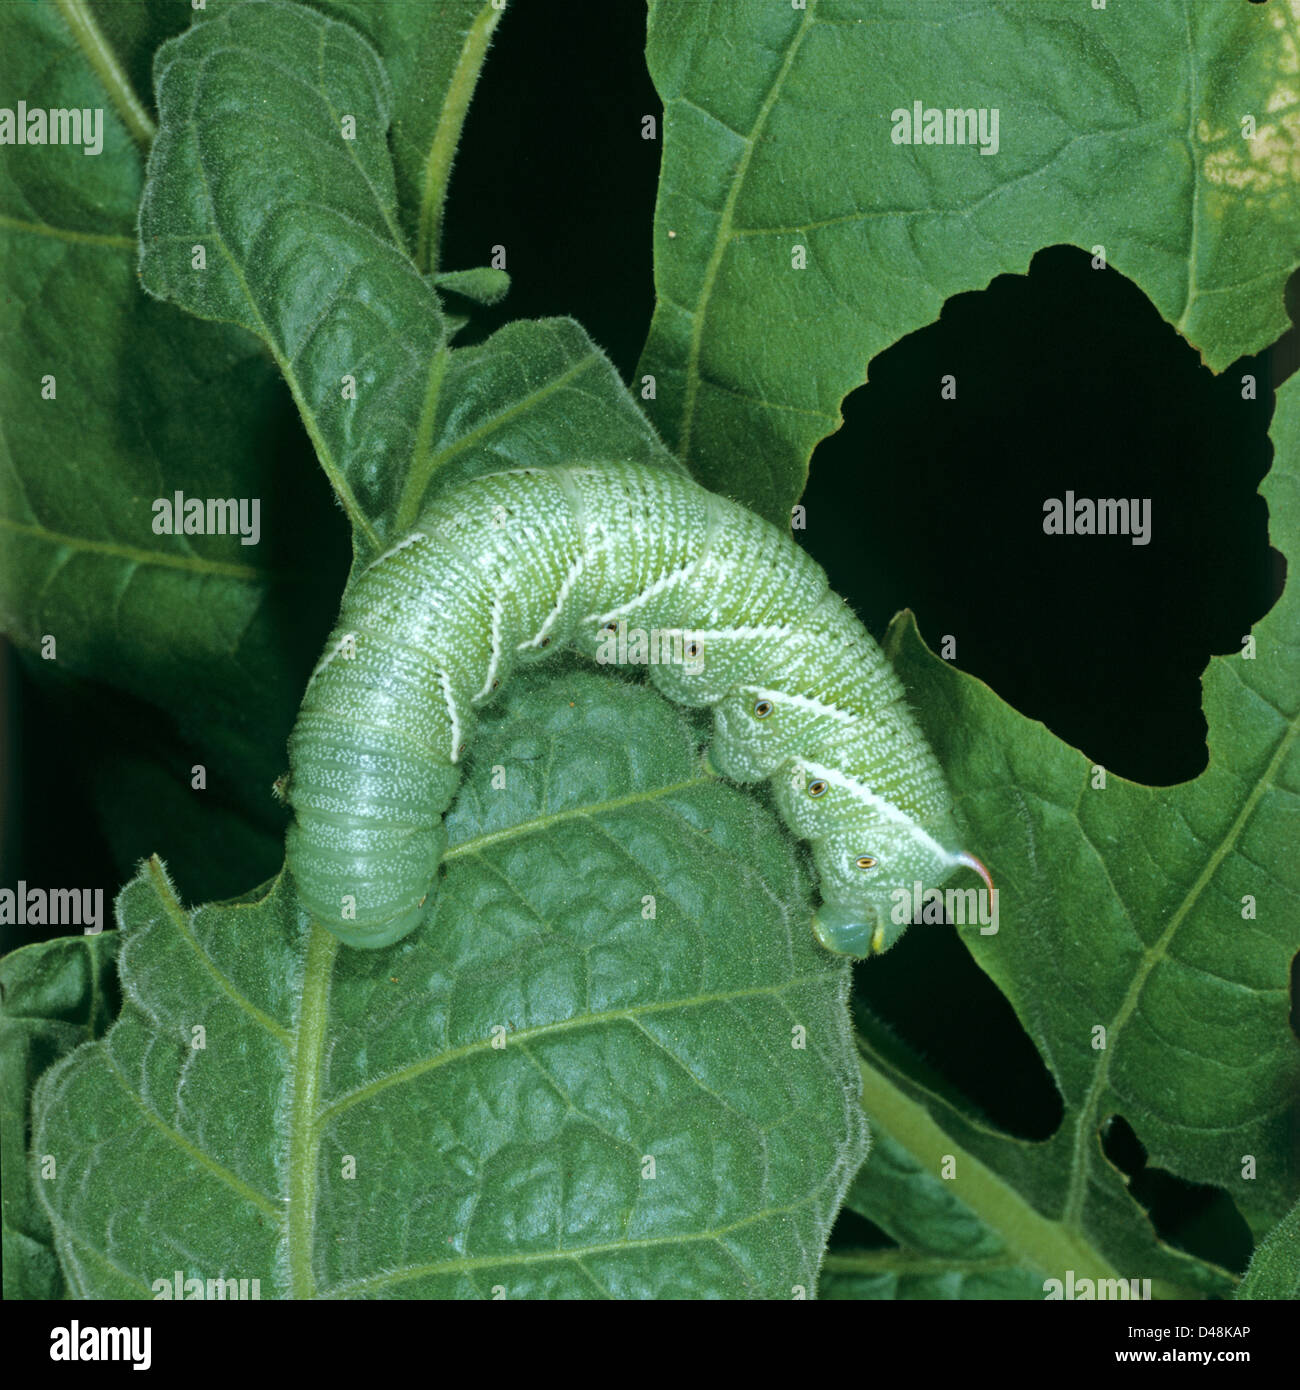 A tobacco hornworm caterpillar, Manduca secta, a serious pest of tobacco on damaged leaves Stock Photo